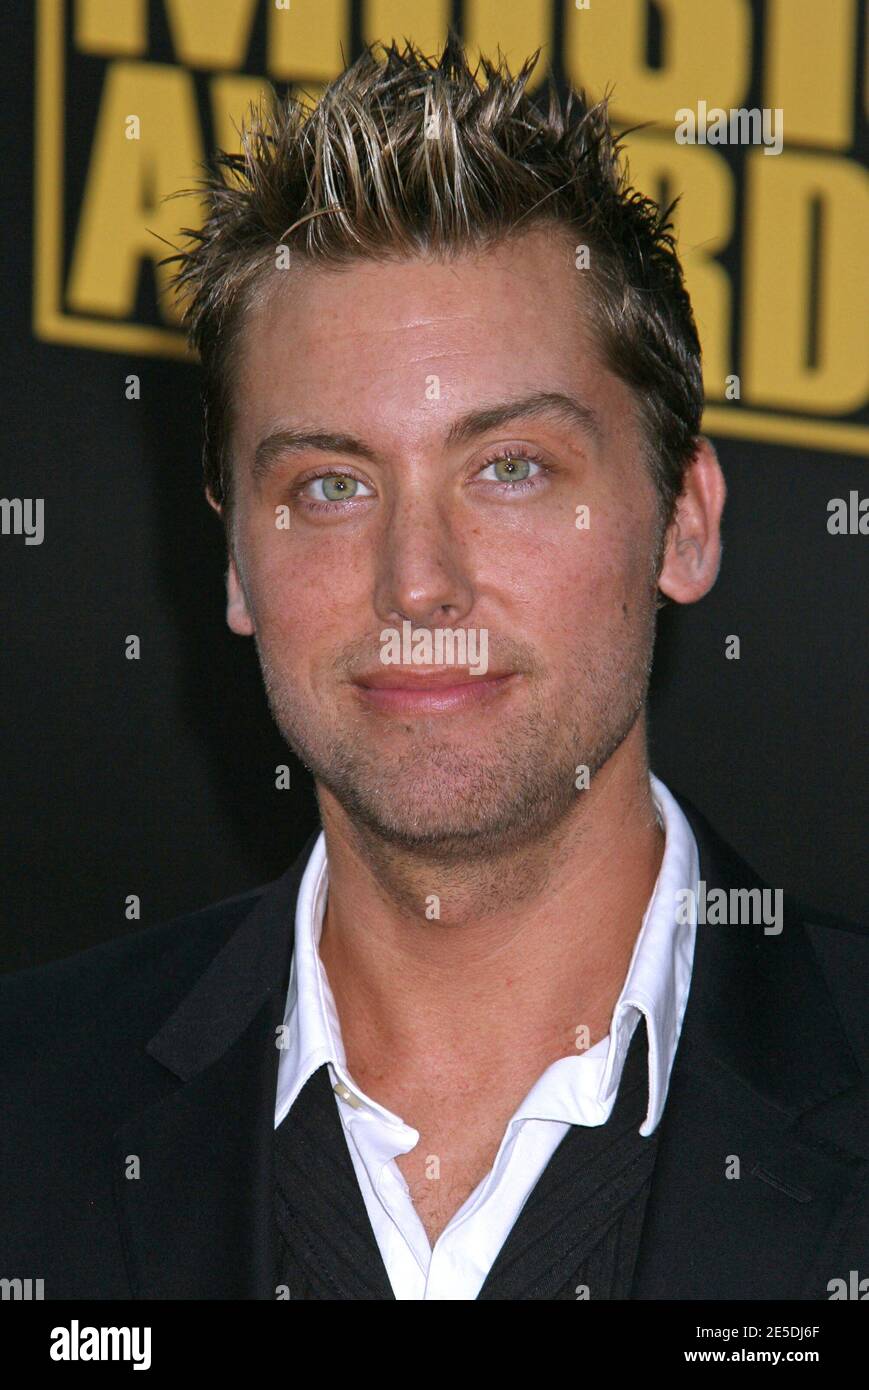 Lance Bass arriving for the 2008 American Music Awards held at the Nokia Theatre in Los Angeles, CA, USA on November 23, 2008. Photo by Baxter/ABACAPRESS.COM Stock Photo